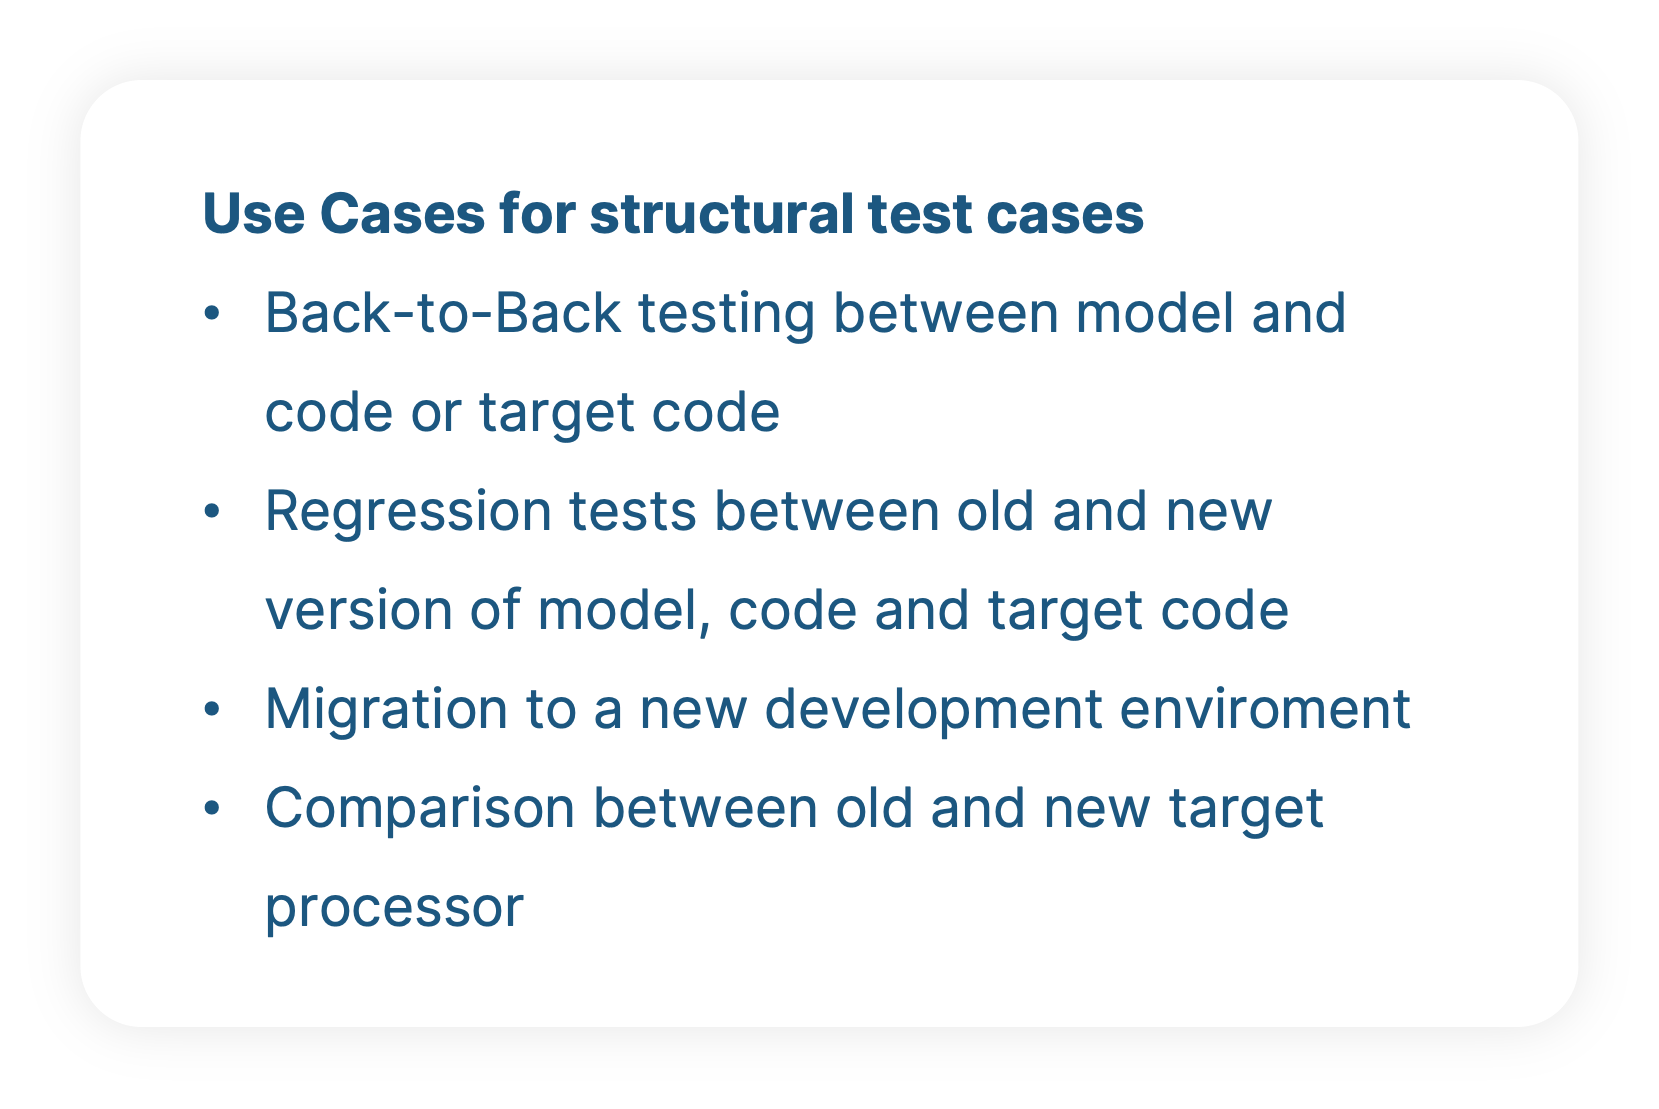 Difference of Functional and Structural Test Cases - Examples for use cases with structural test cases